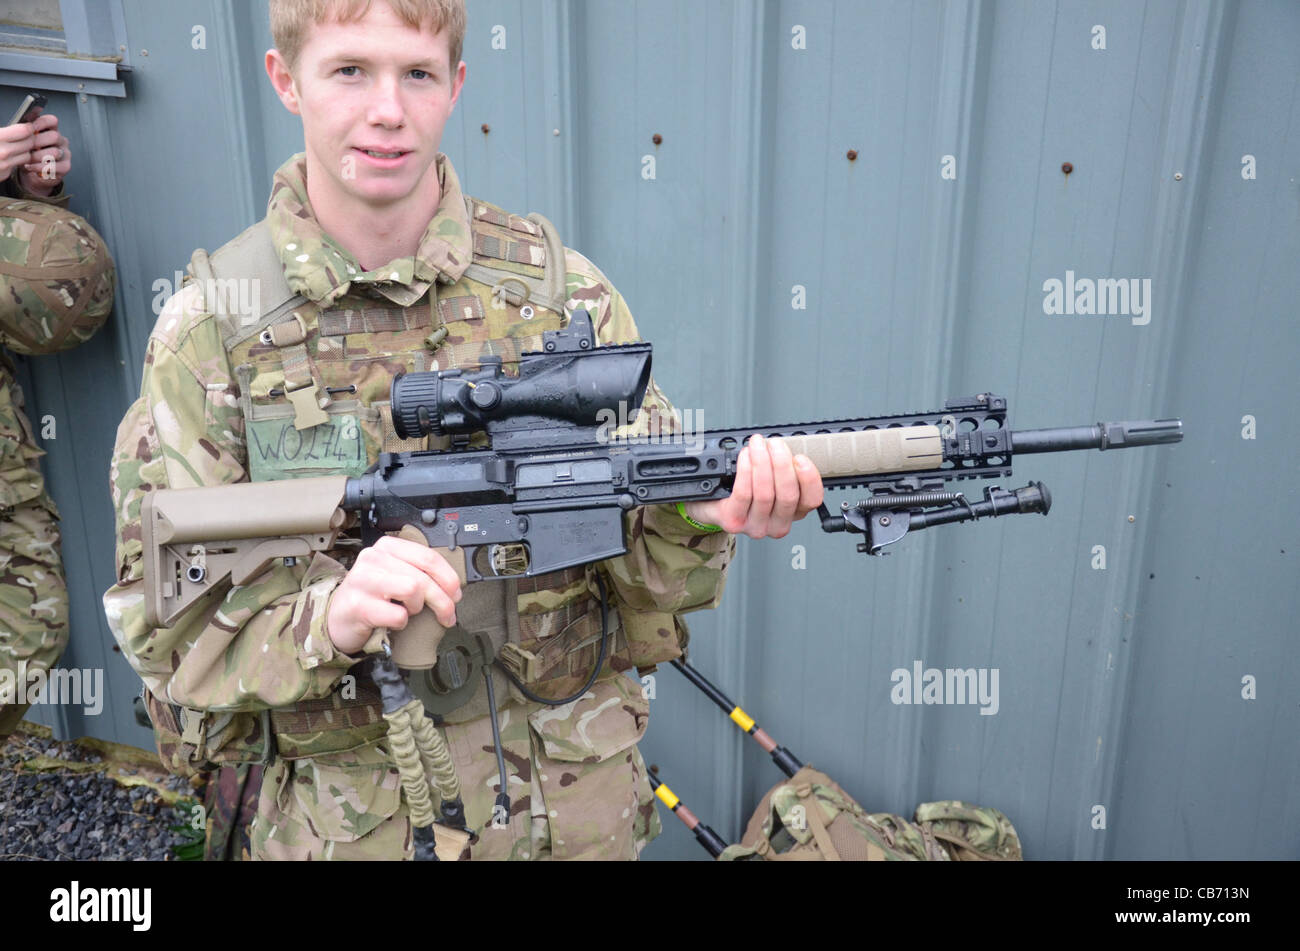 L129A1 Sharpshooter Rifle The new Sharpshooter rifle will improve